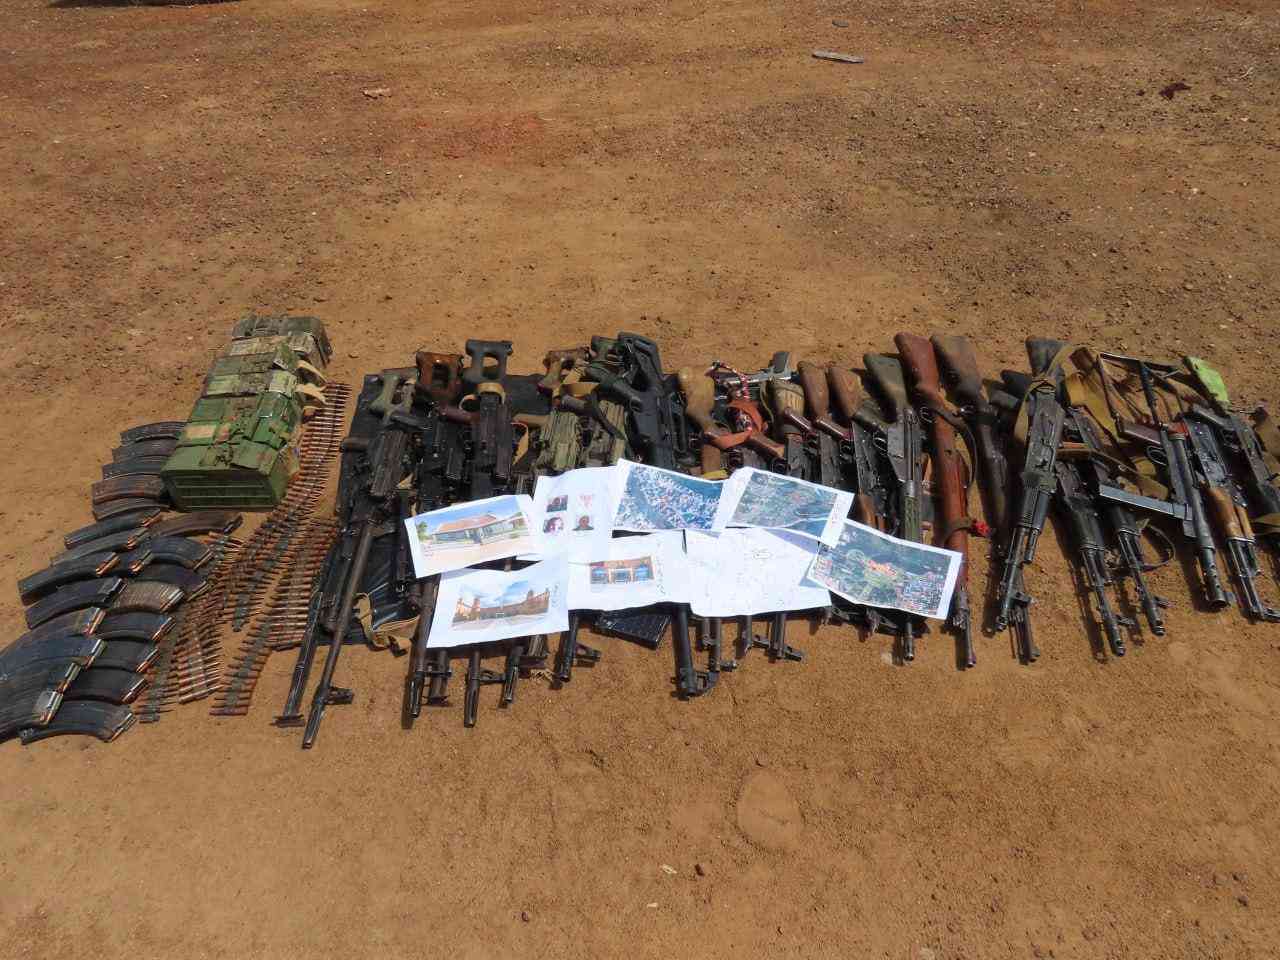 Mozambique's military discovers cache of weapons used by ISM ...militants plan attacks in SA